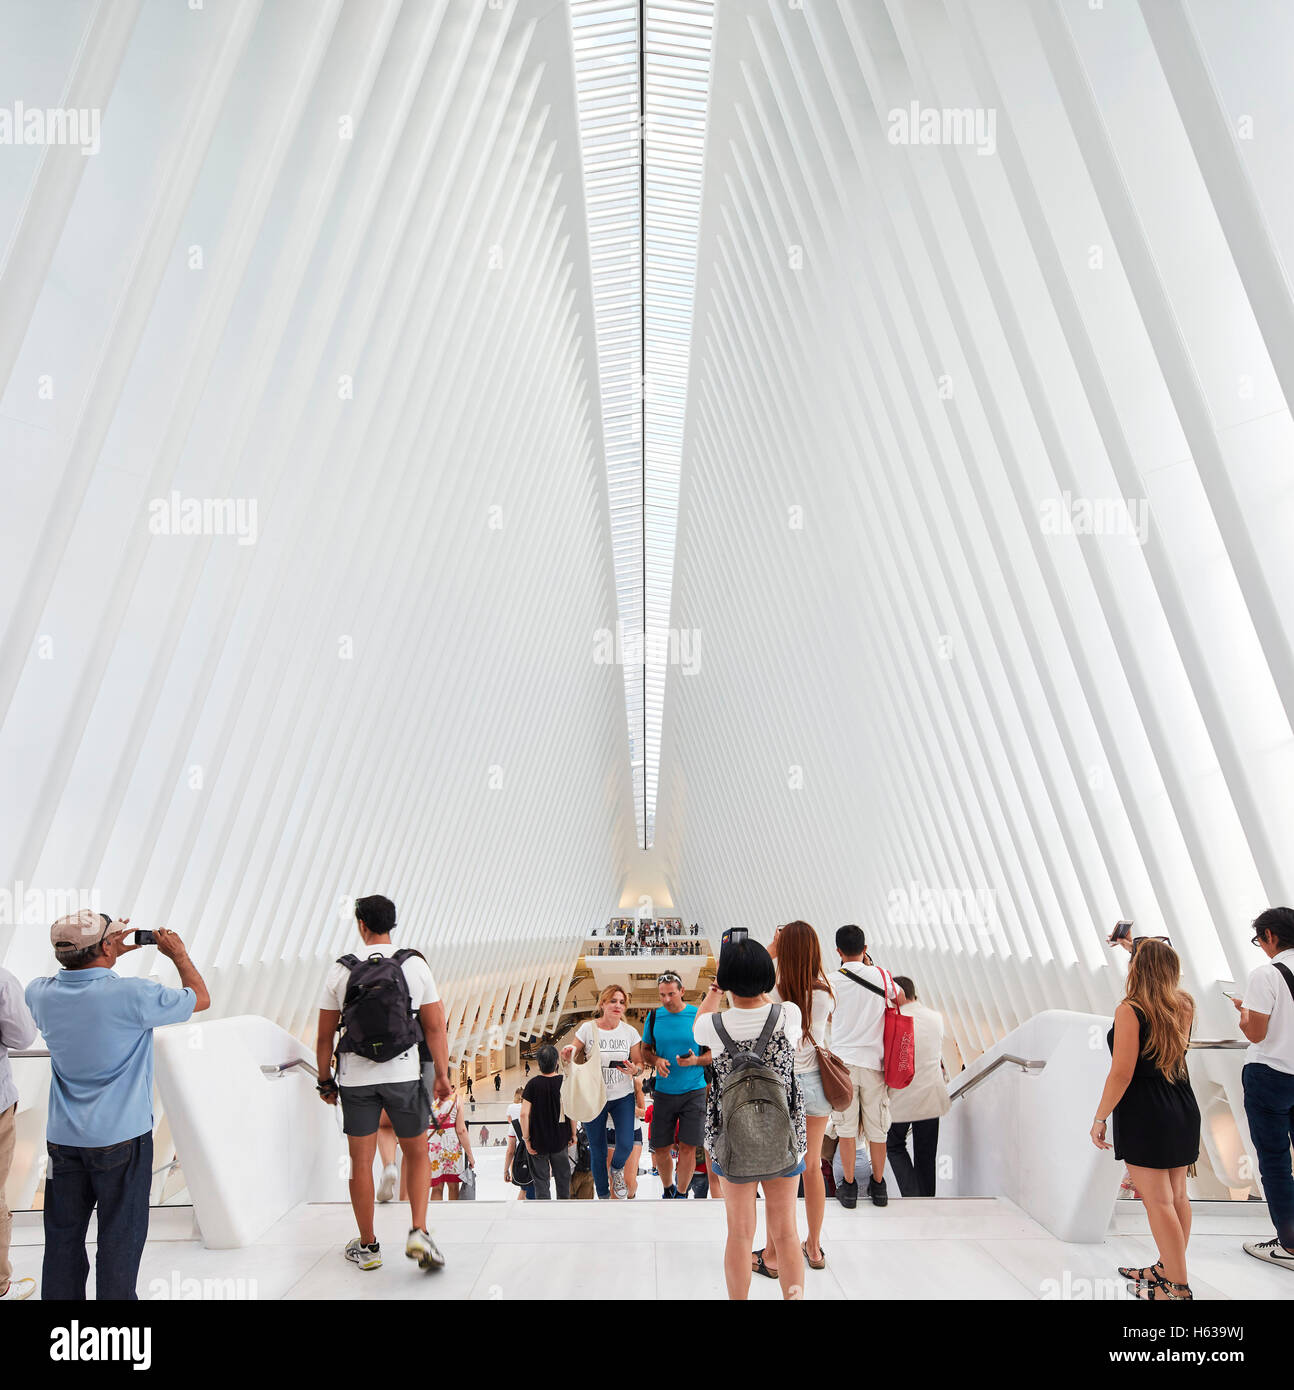 Cathedral-like transit hall interior from viewing platform. The Oculus, World Trade Center Transportation Hub, New York, United Stock Photo